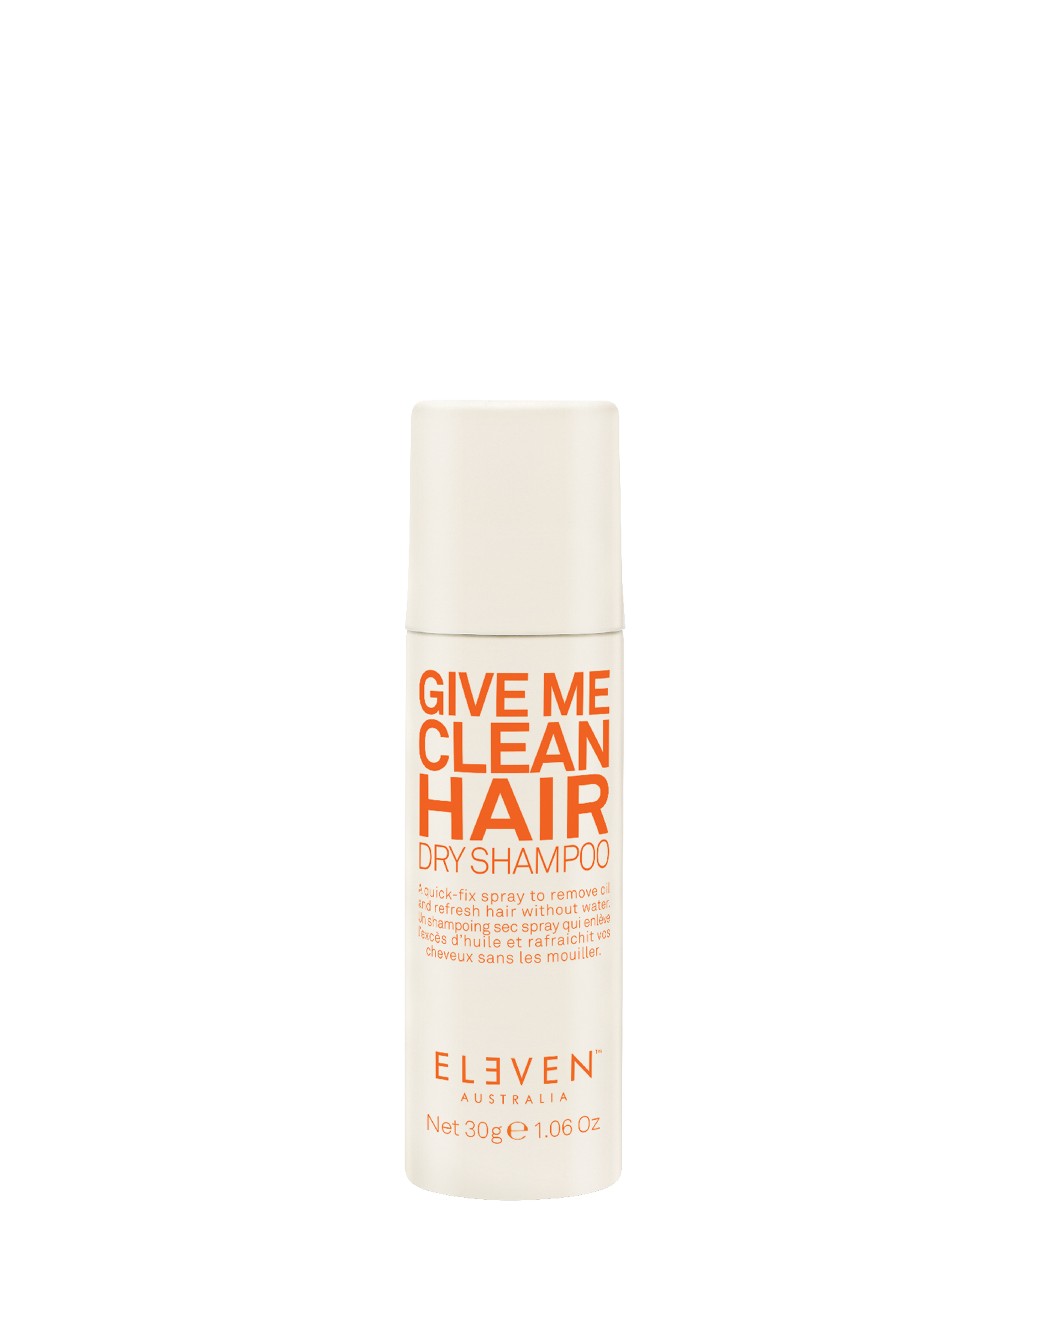 Give Me Clean Hair Dry Shampoo Travel Size 30g